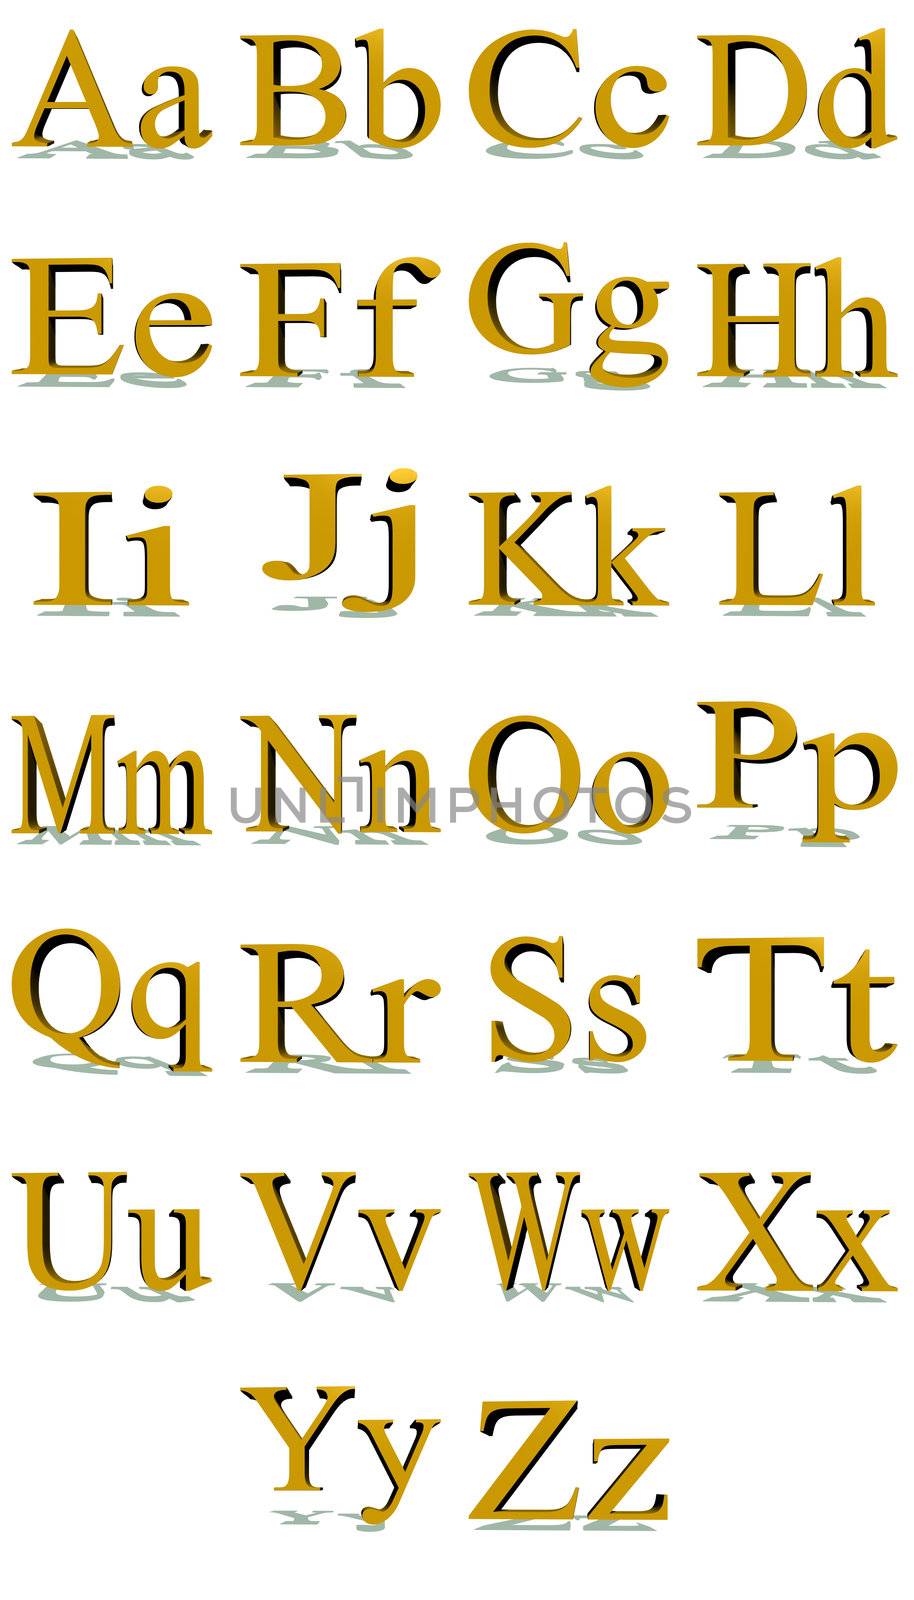 3D Times New Roman gold alphabet with shadows in a white background